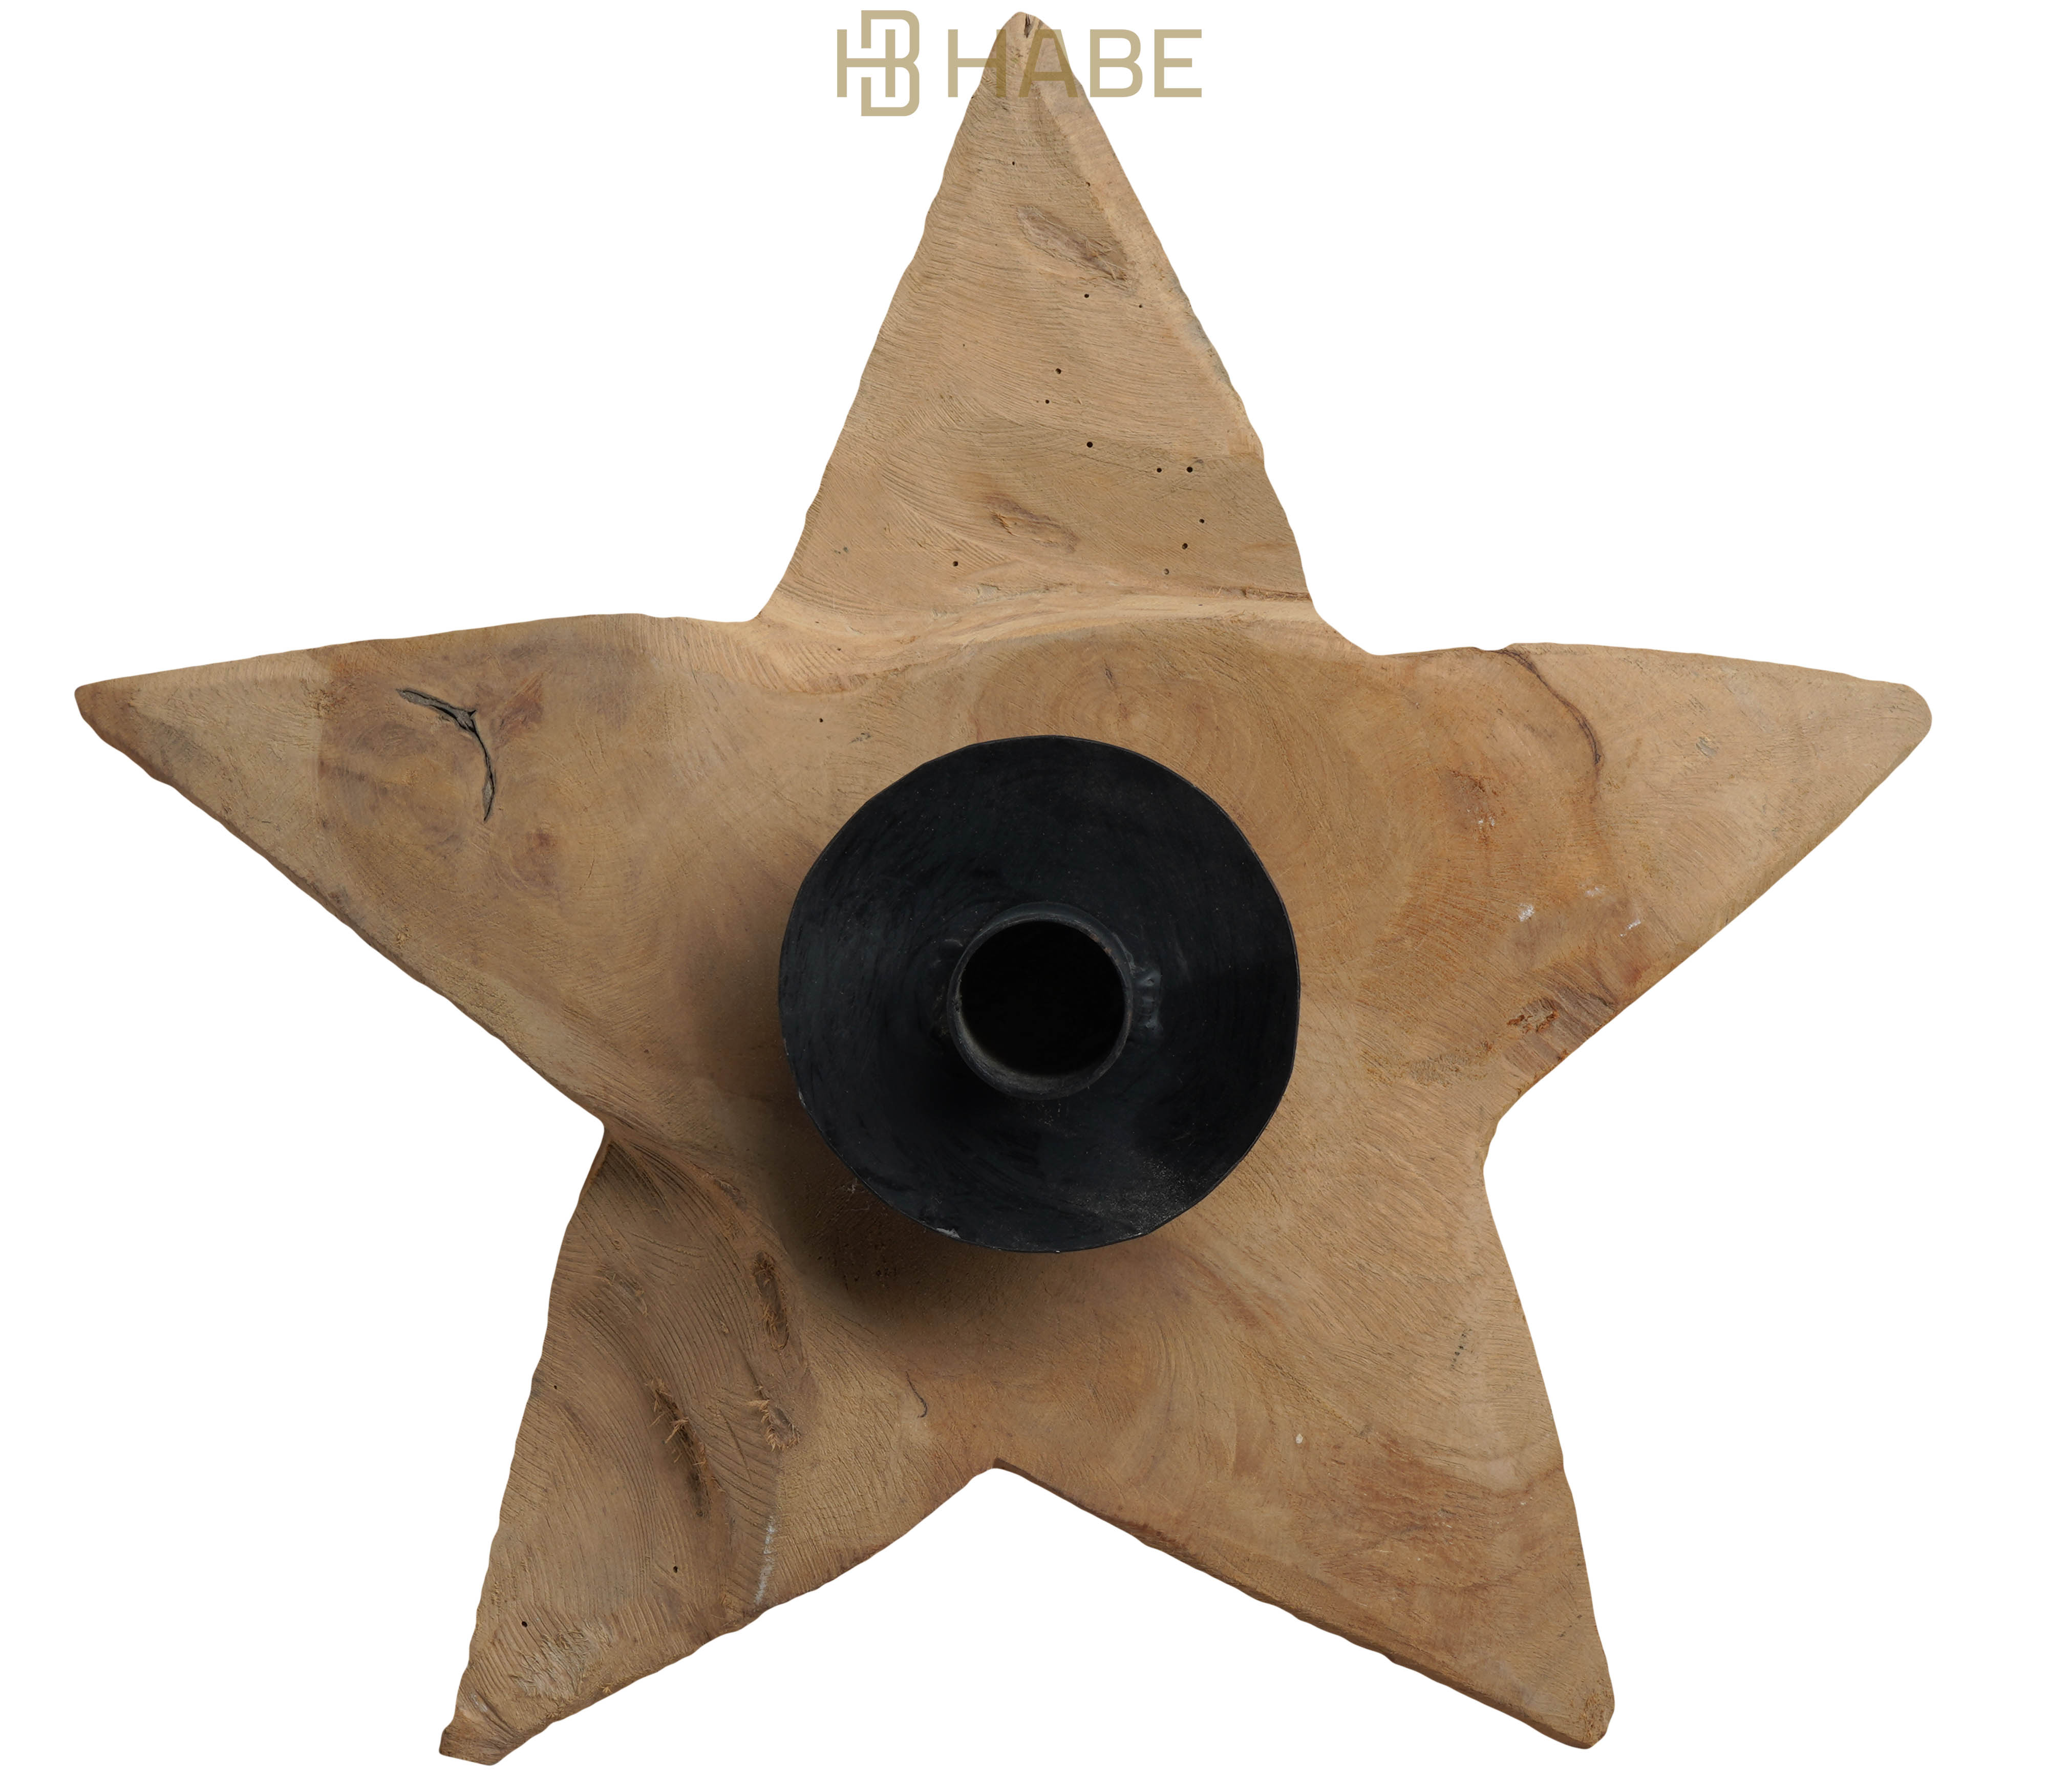 Teak Star S with Dinner Candle Holder 18x18x12 cm Natural